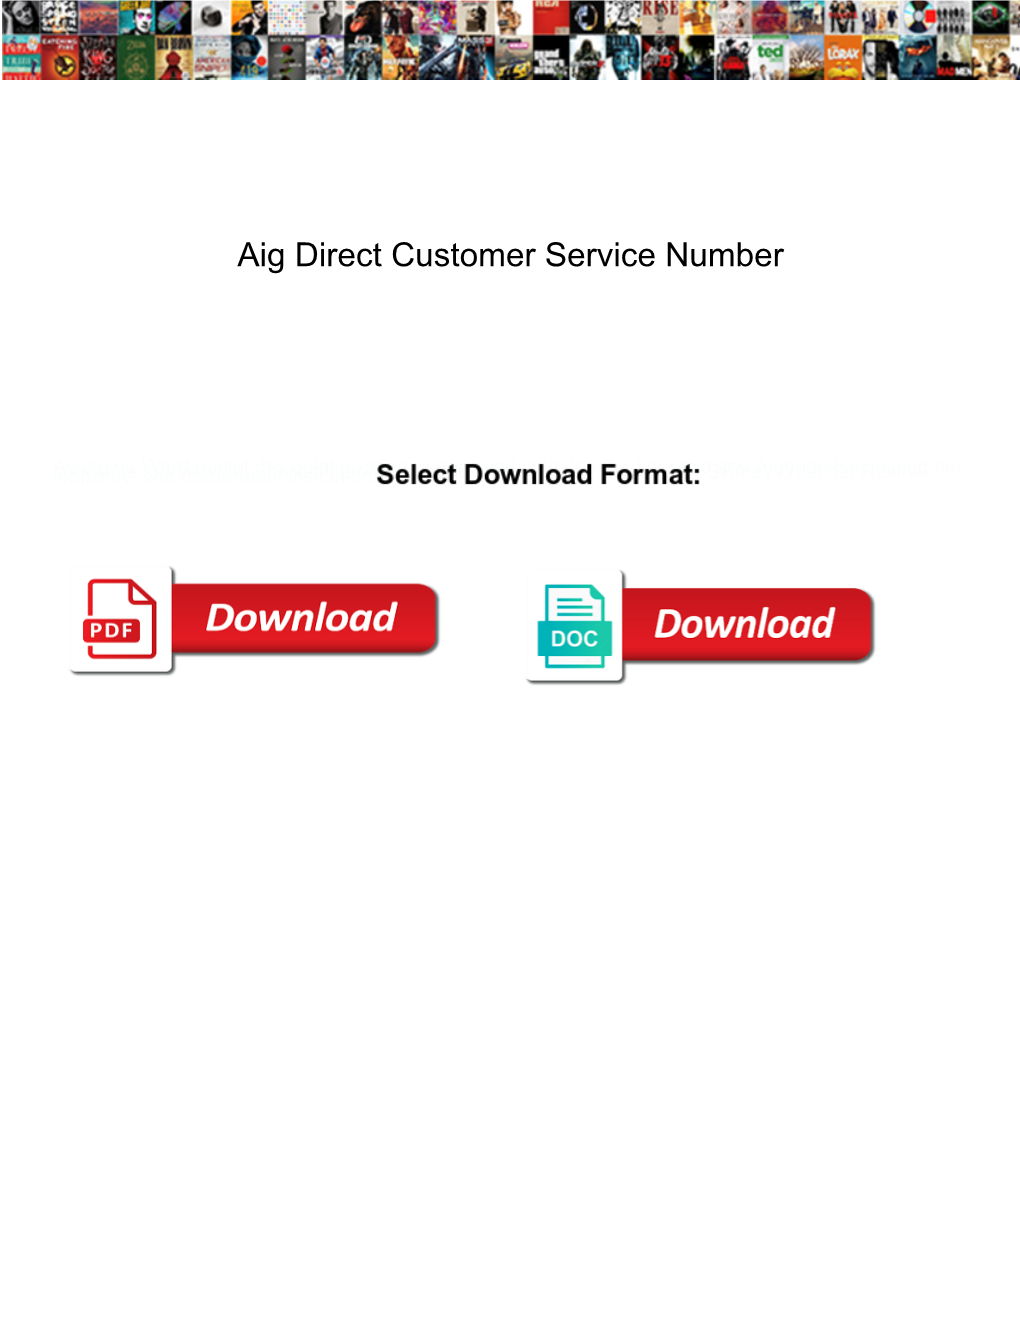 Aig Direct Customer Service Number